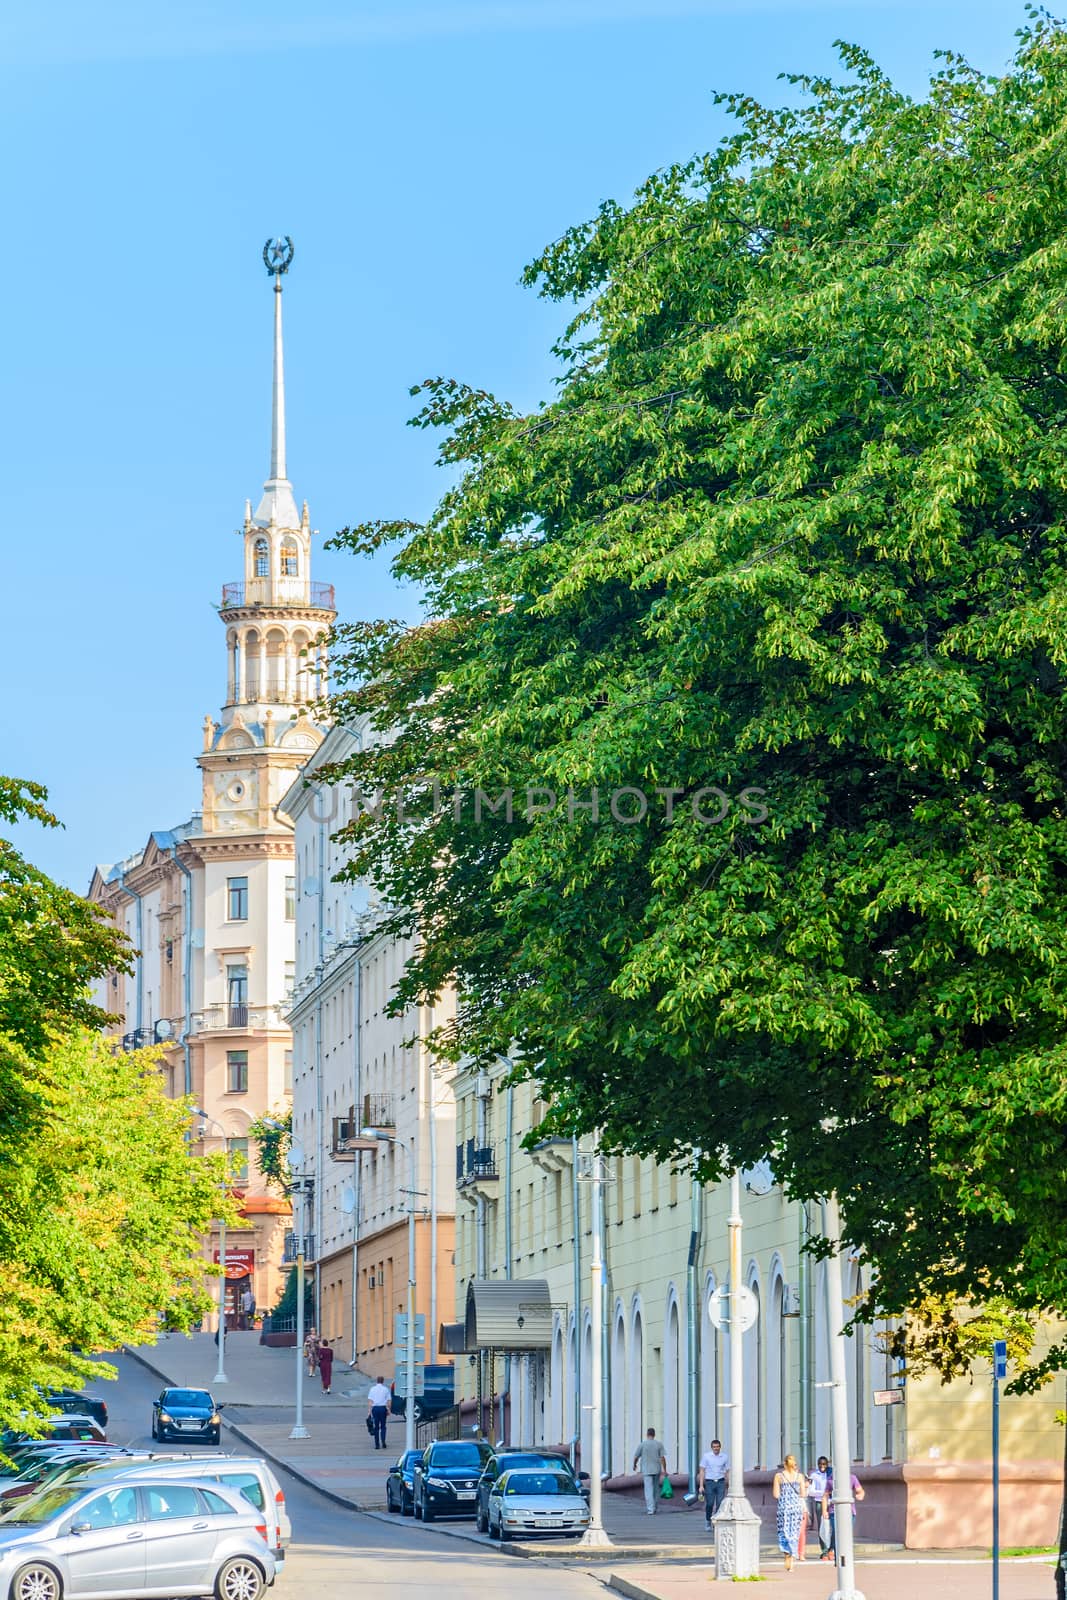 City landscape. House with a spire the Stalinist classicism by Grommik